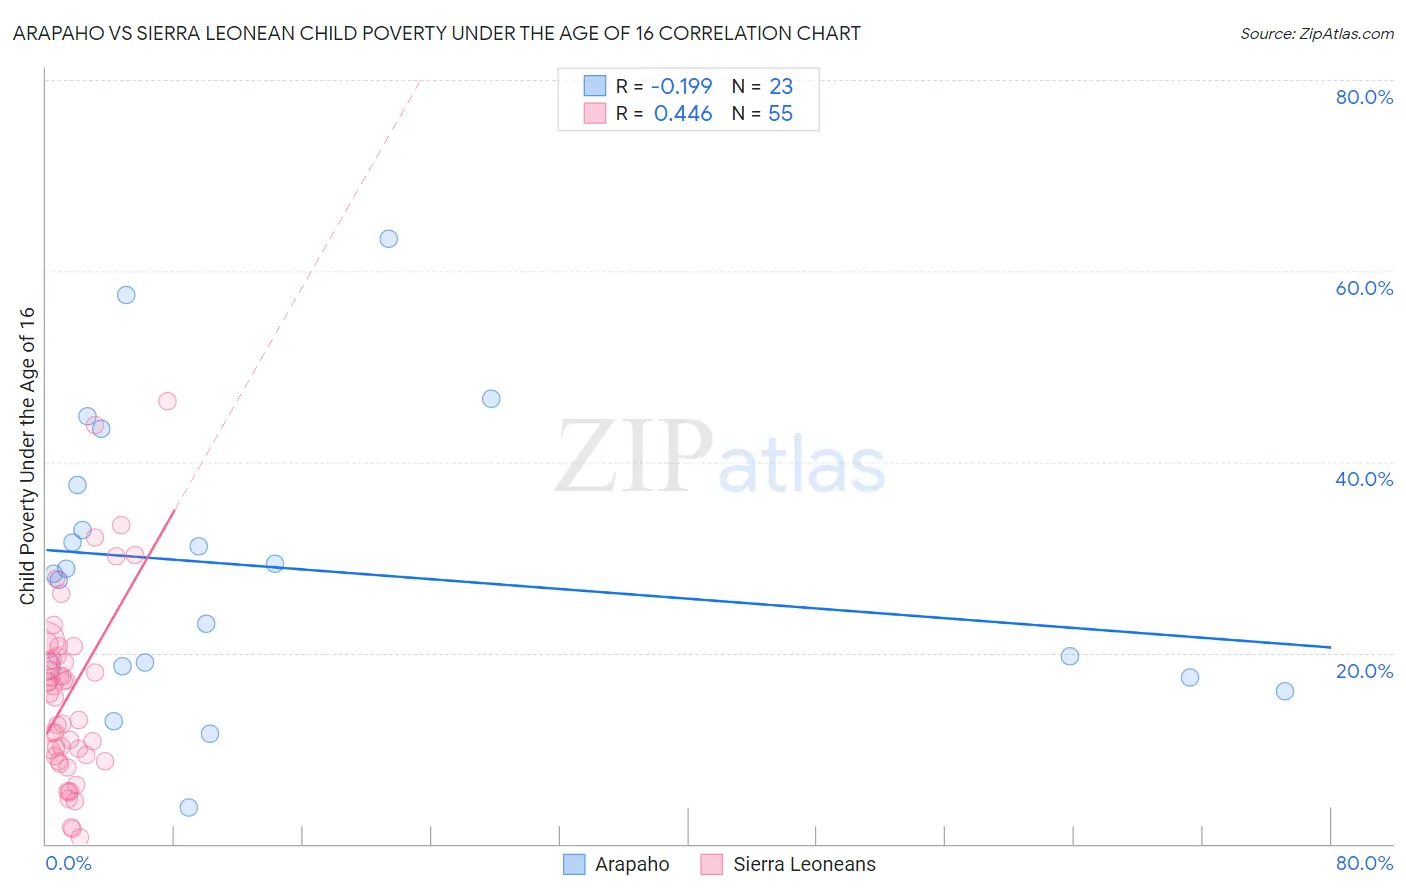 Arapaho vs Sierra Leonean Child Poverty Under the Age of 16